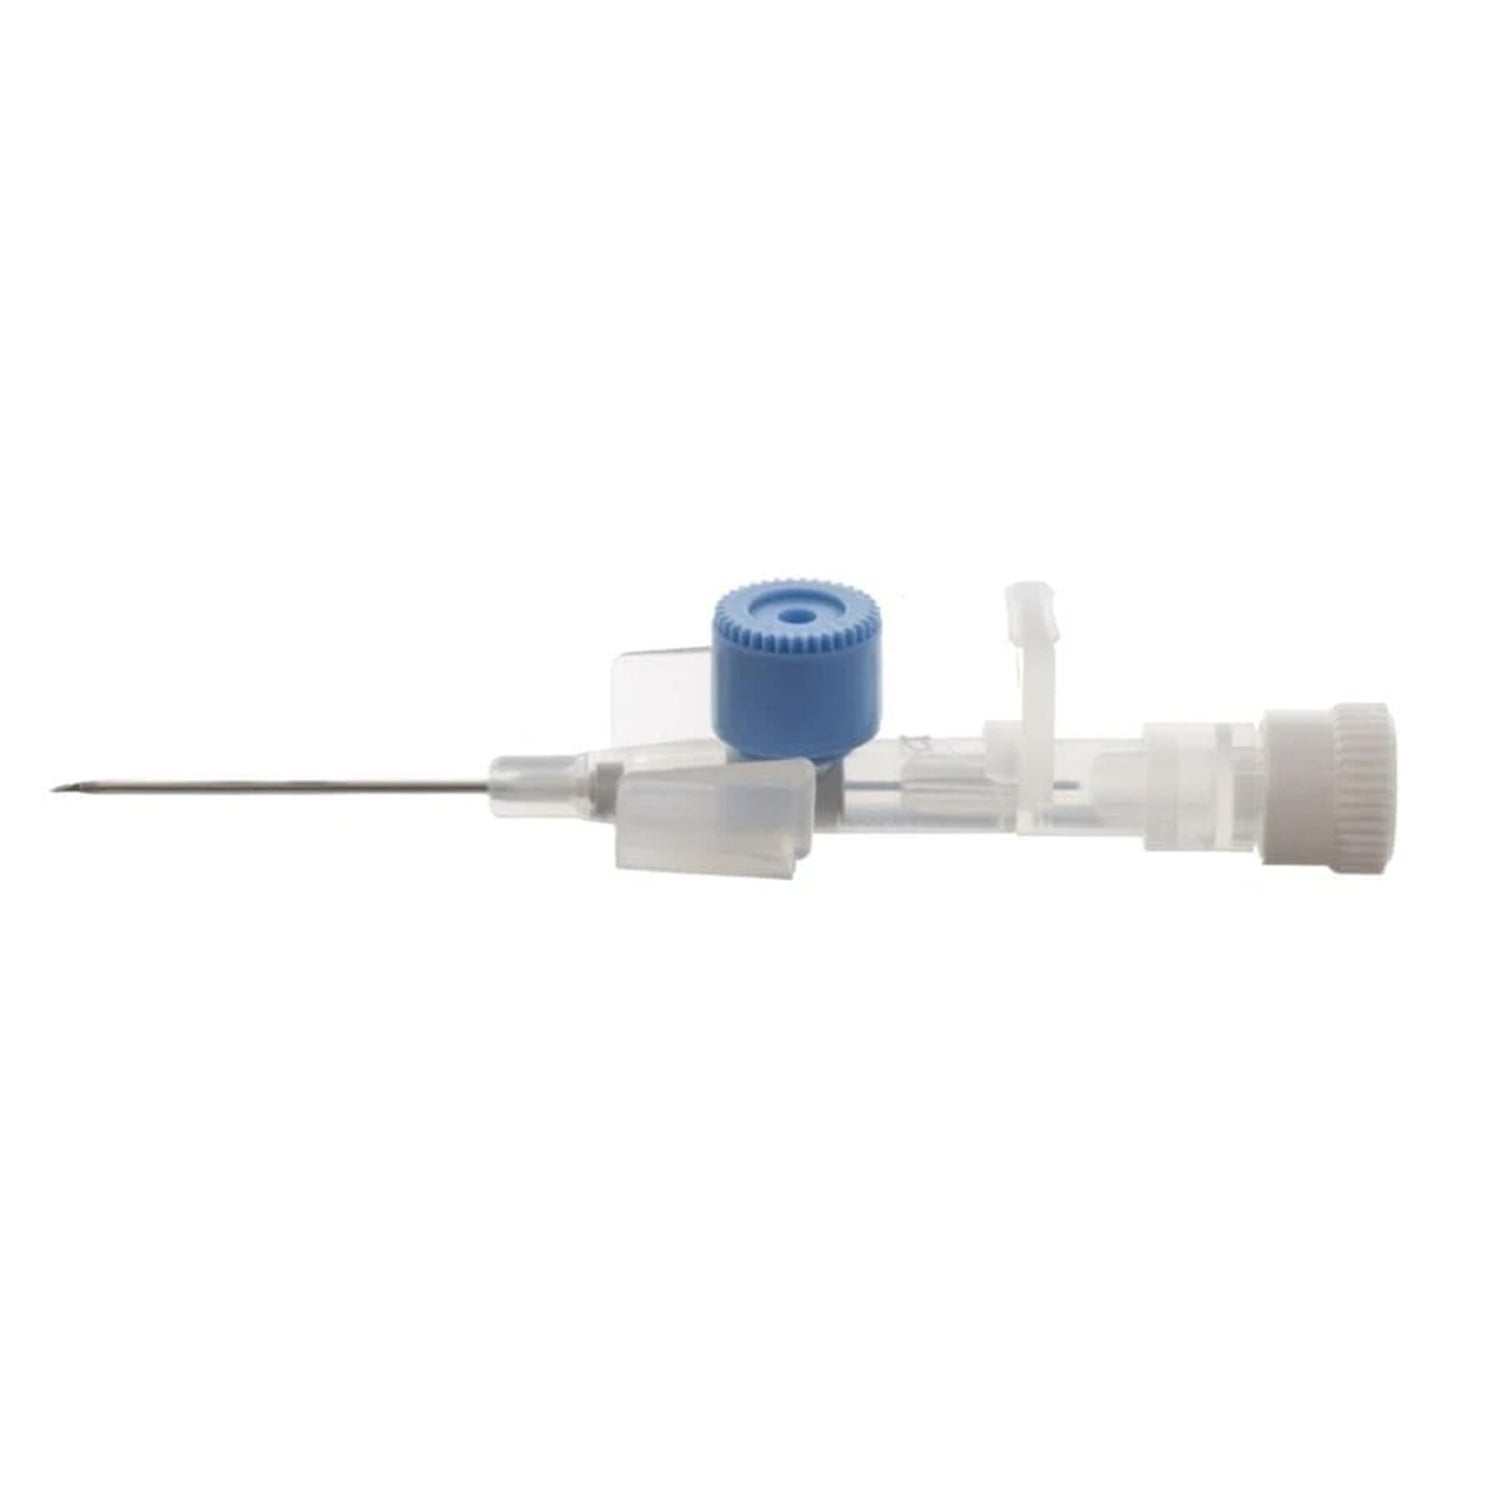 BD Venflon Pro Safety Peripheral IV Cannula with Injection Port | Blue | 22G x 25 x 0.9mm | Pack of 50